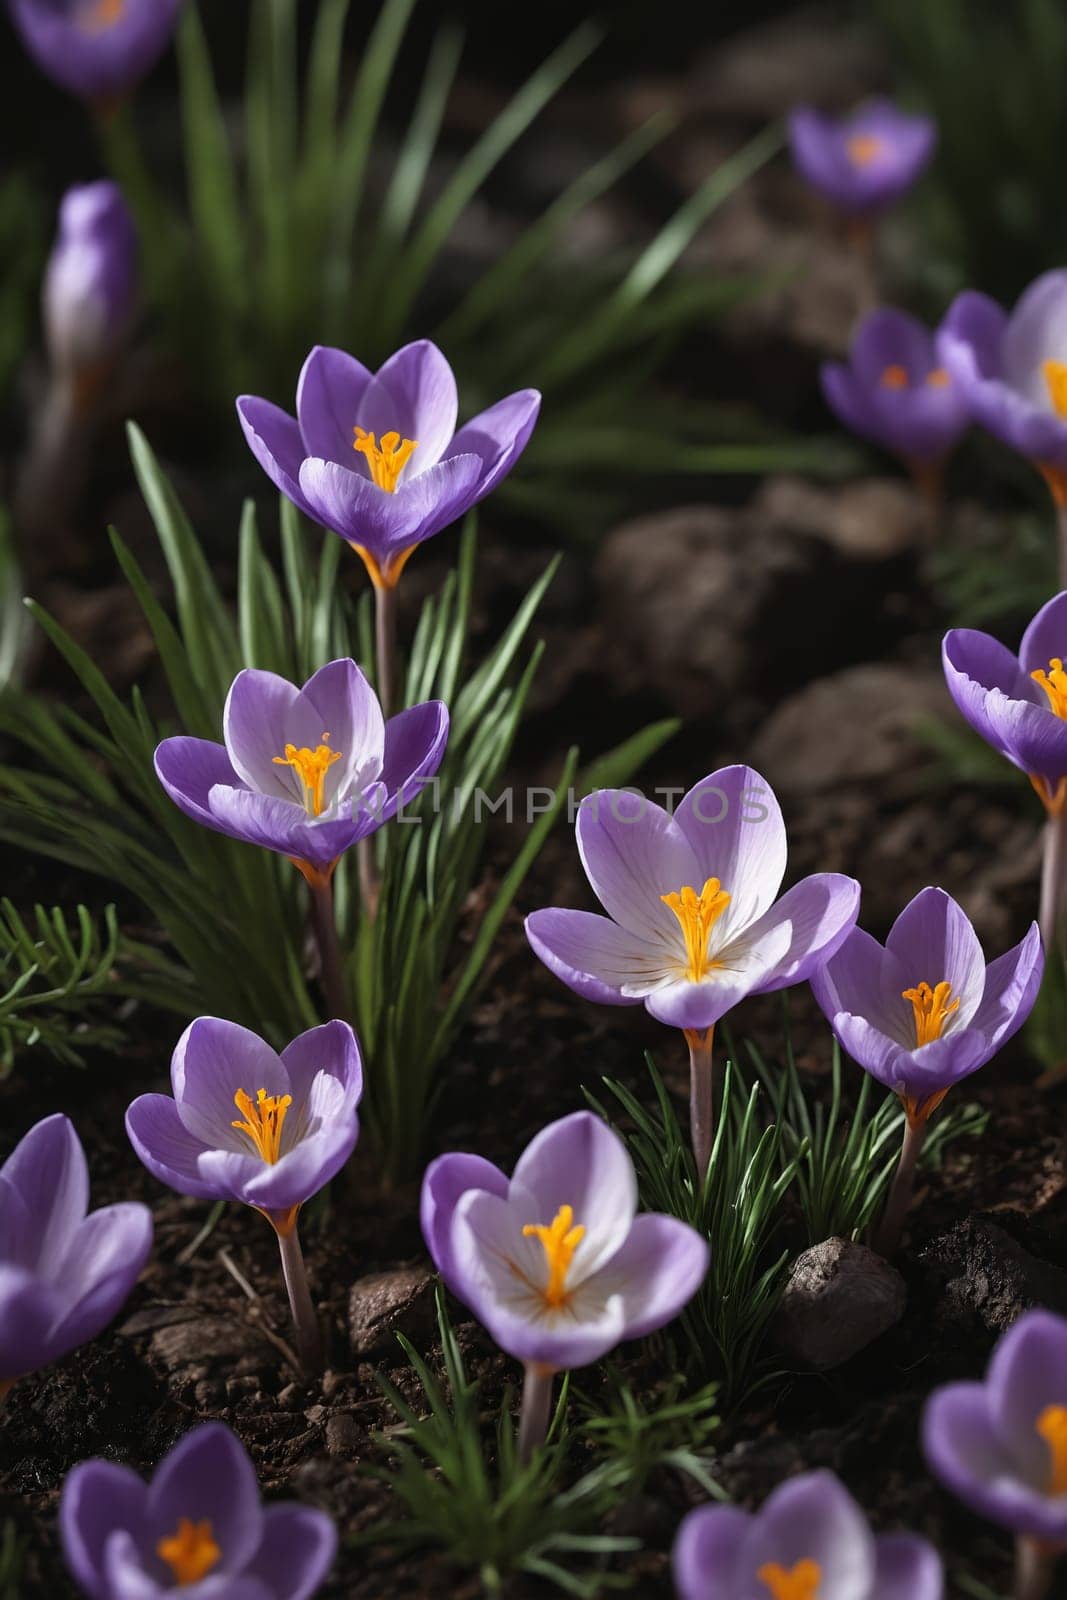 Close-up of Vibrant Crocus Blooms in Garden. by Andre1ns